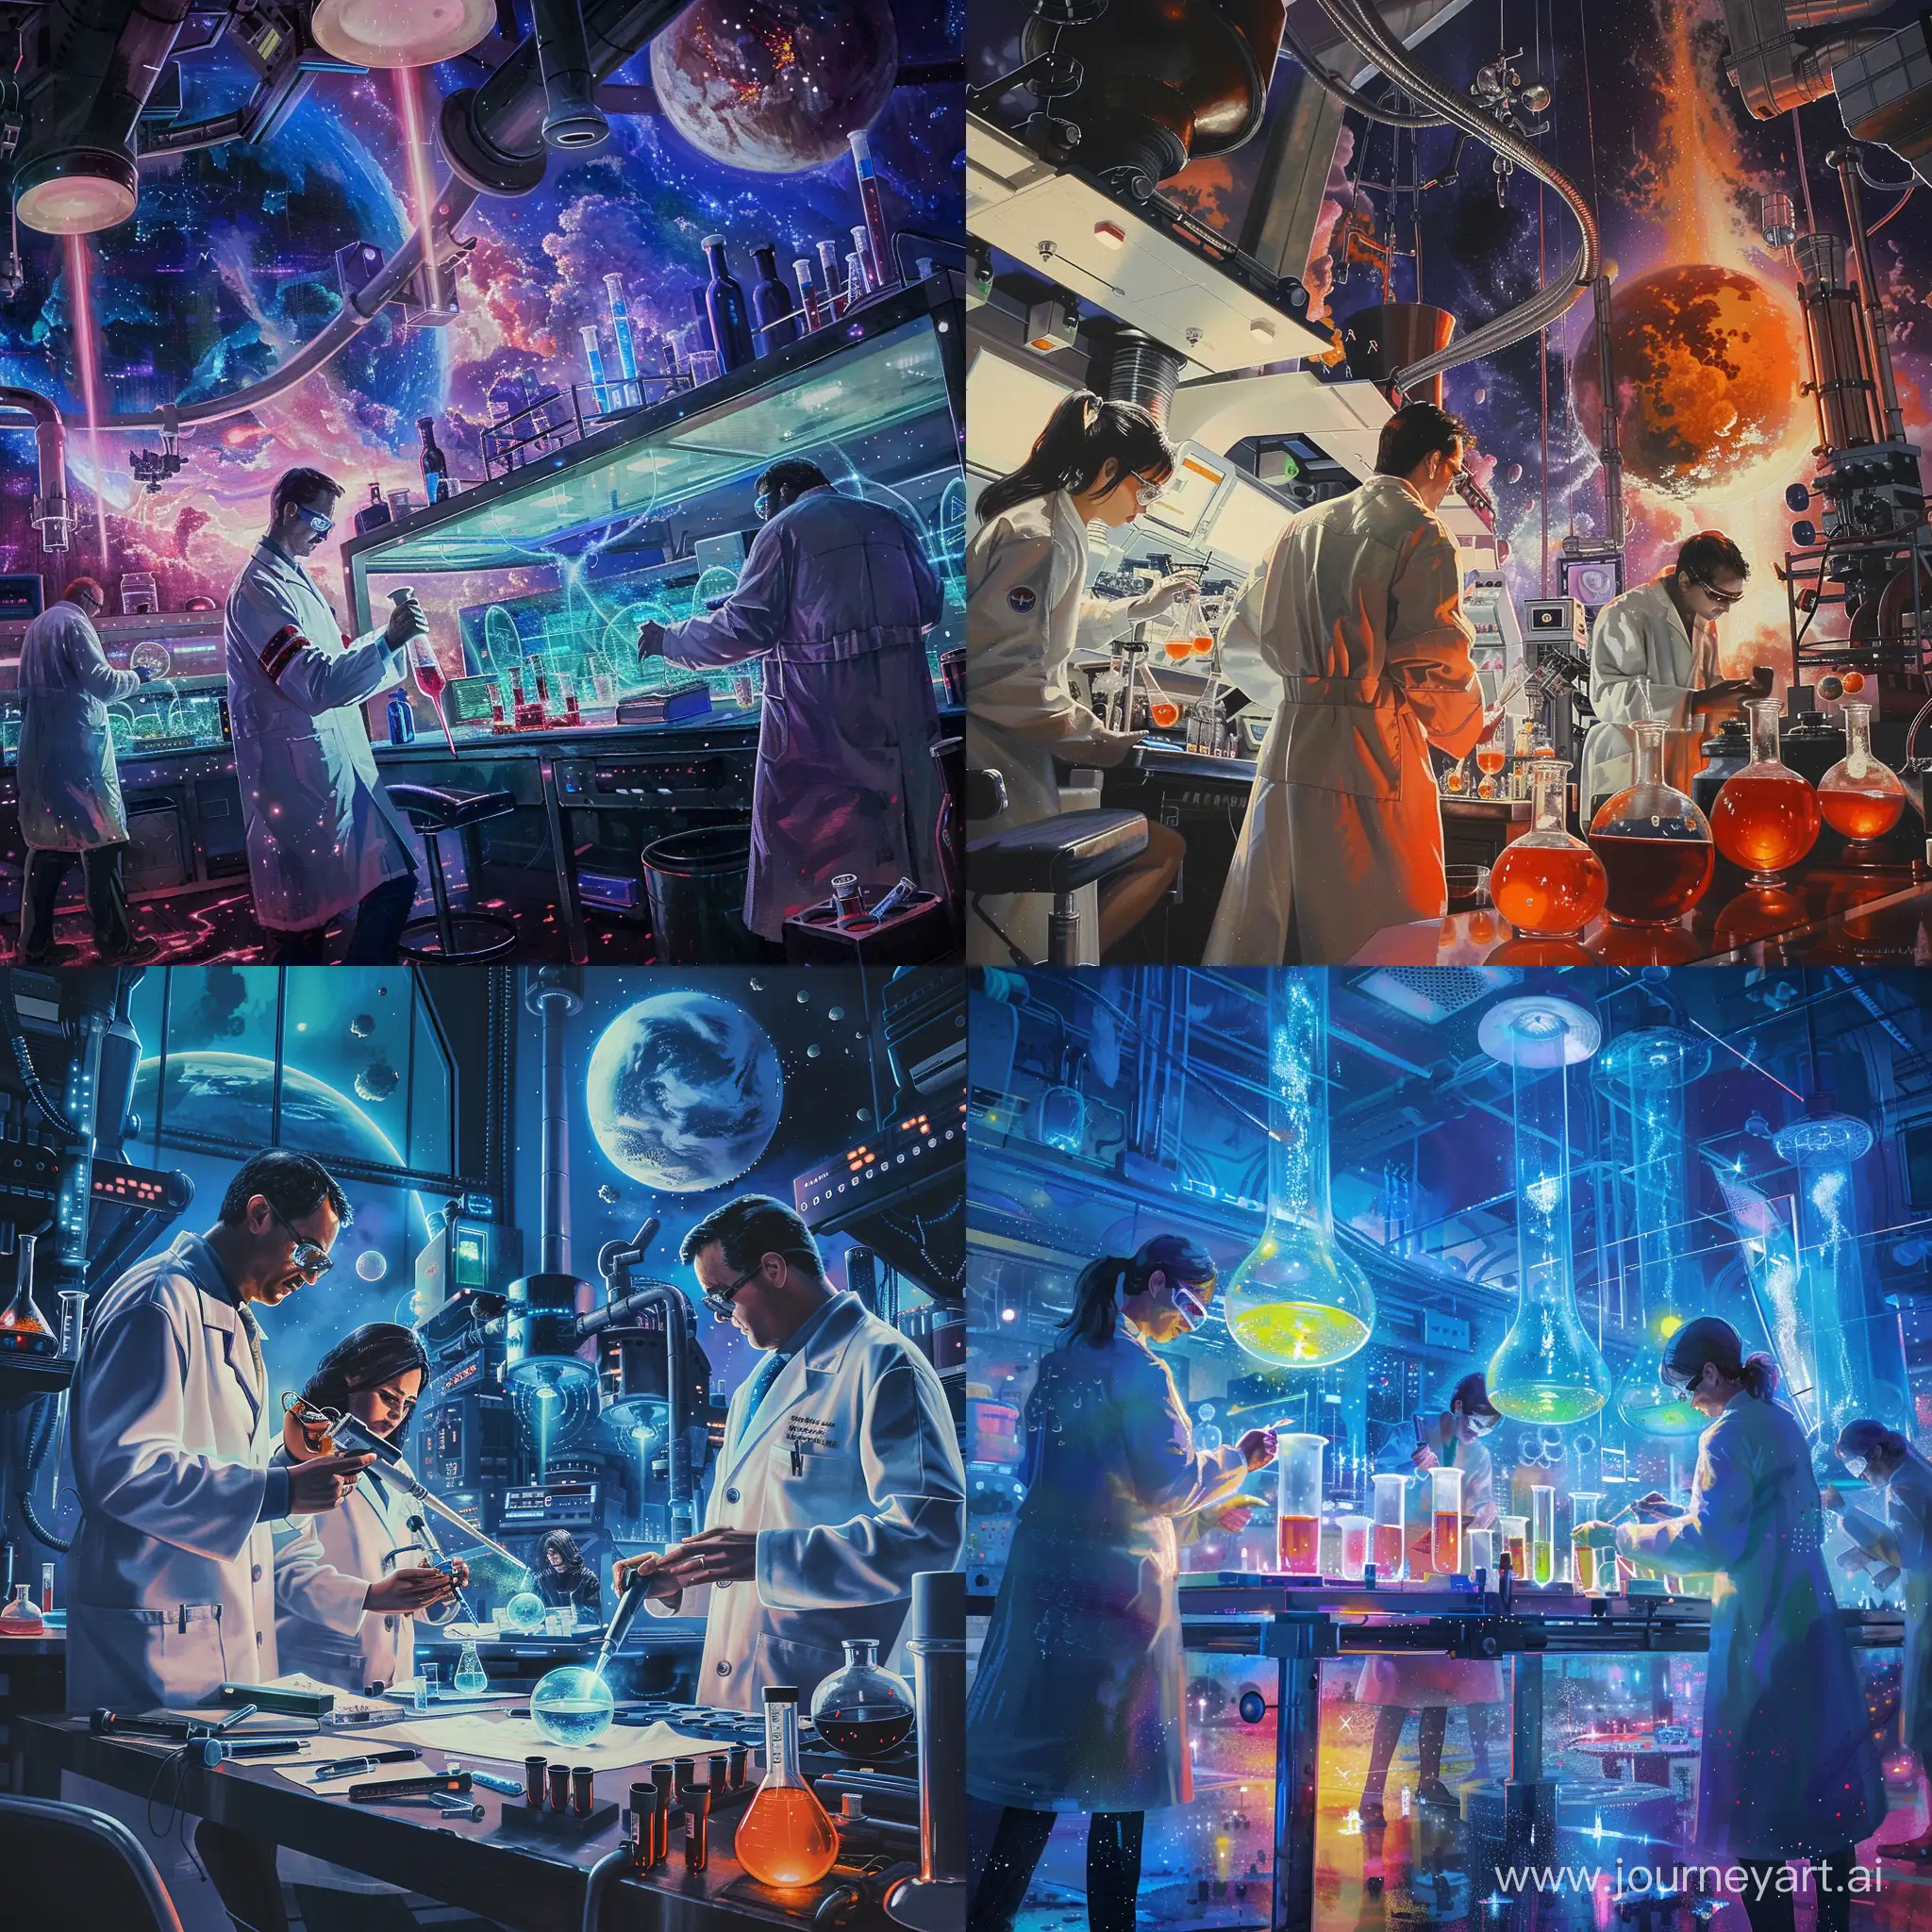  depicting scientists engaged in experiments surrounded by laboratory equipment.
Creative scenes showcasing space exploration, complex biological processes, or advanced technological advances.
A work of art that conveys the excitement and curiosity associated with scientific research, using visual effects to convey the wonder of discovery.